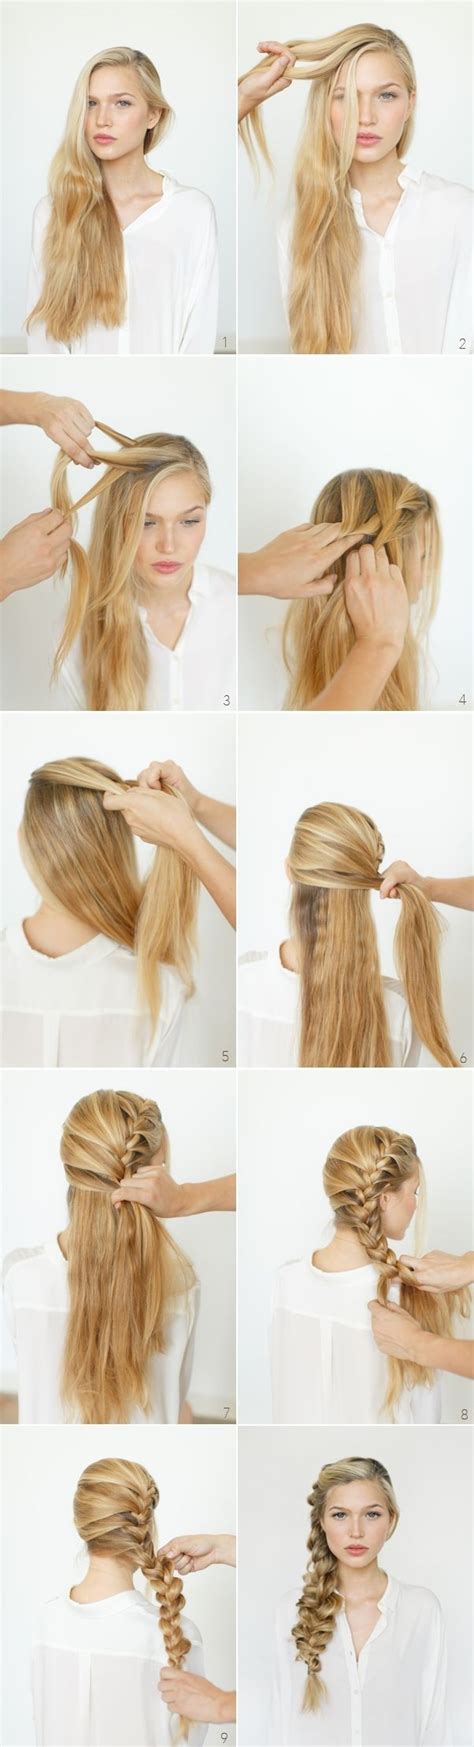 Braid the top of the style together so it creates a pompadour. 8 Cute Braided Hairstyles for Girls: Long Hair Ideas ...